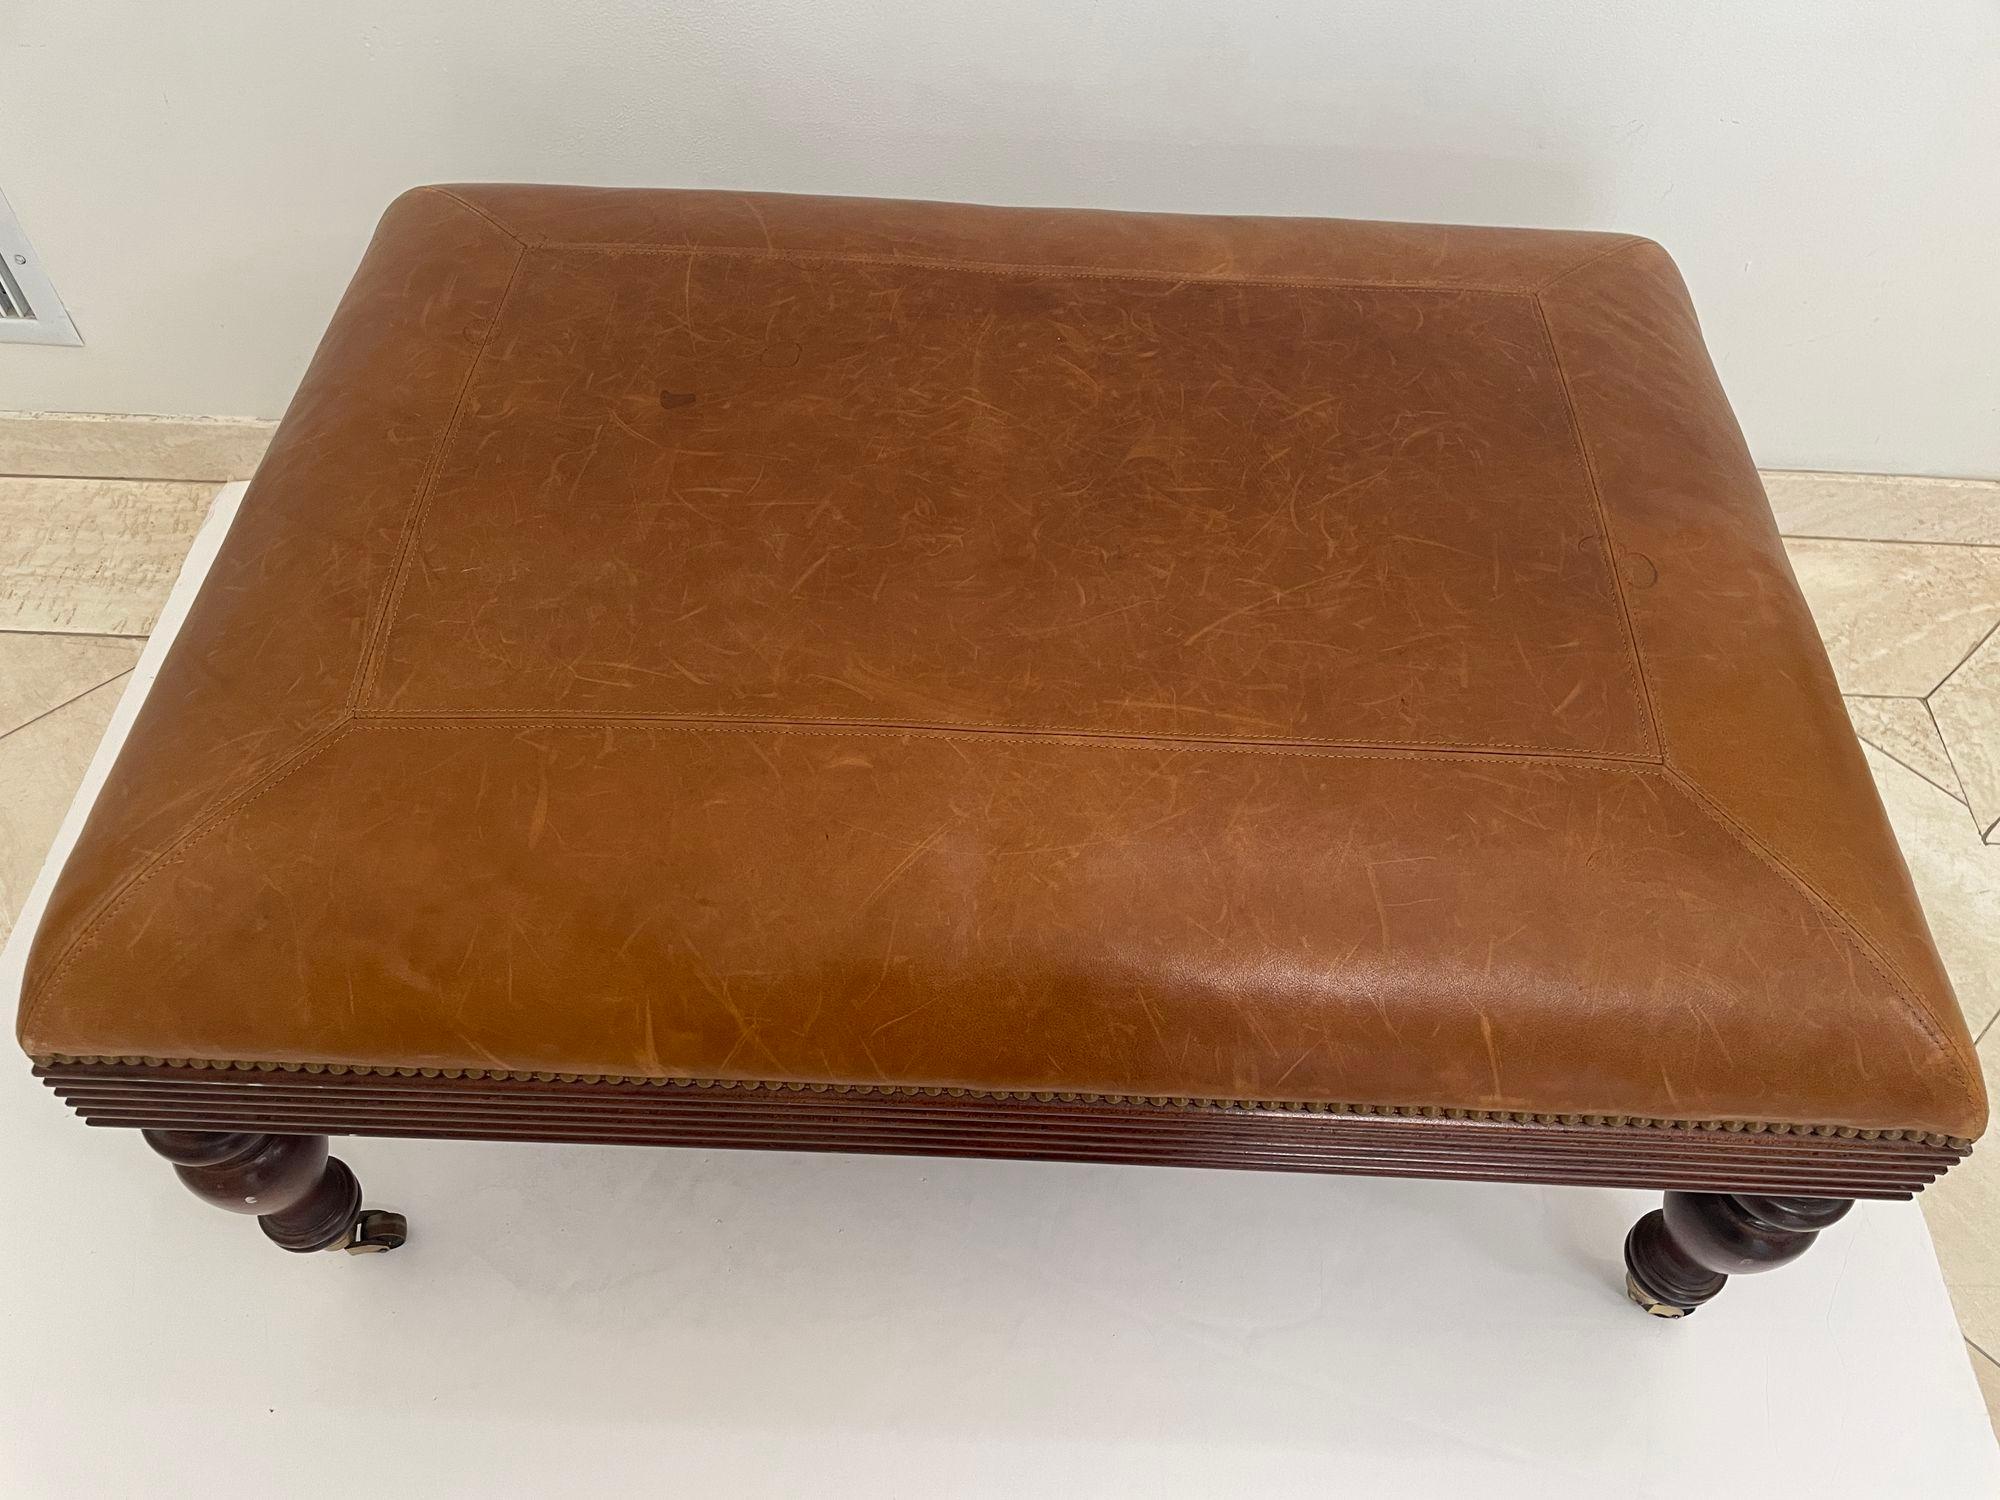 Rectangular Victorian English Style leather Ottoman.
Coffee table or cocktail table with turned walnut legs with brass casters and brass nailhead trim.
Dimensions: H 17